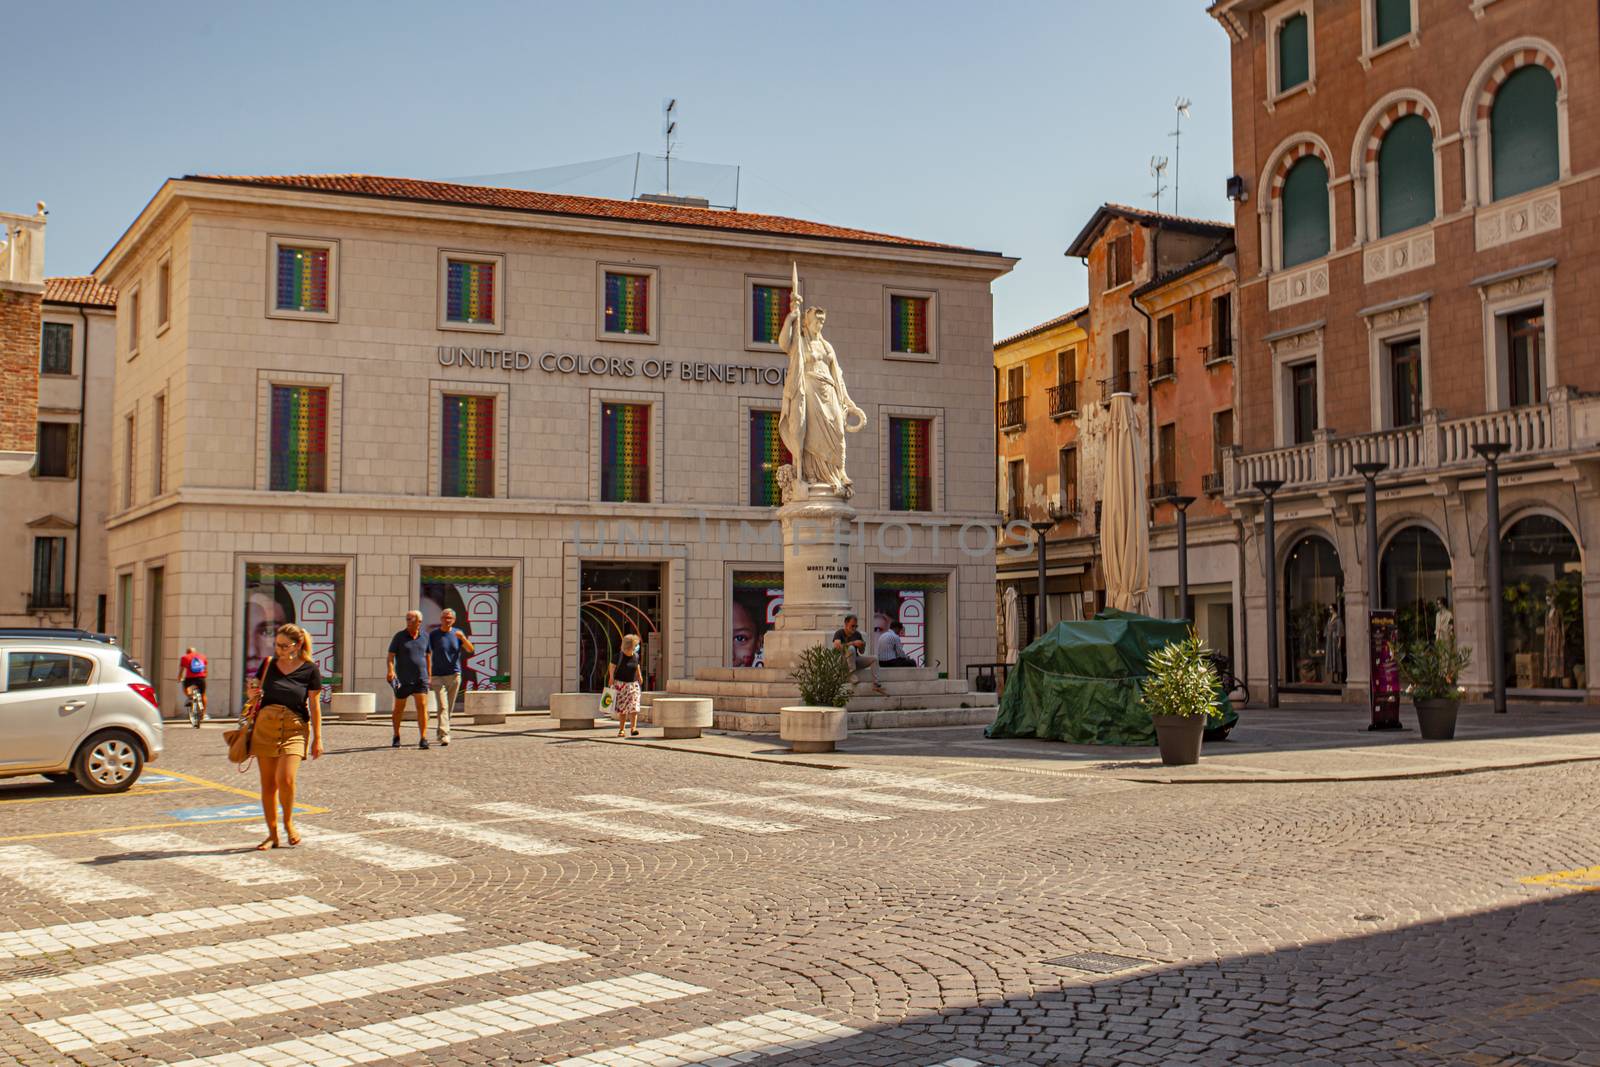 TREVISO, ITALY 13 AUGUST 2020: Piazza della libertà or liberty sqaure in english in Treviso in Italy